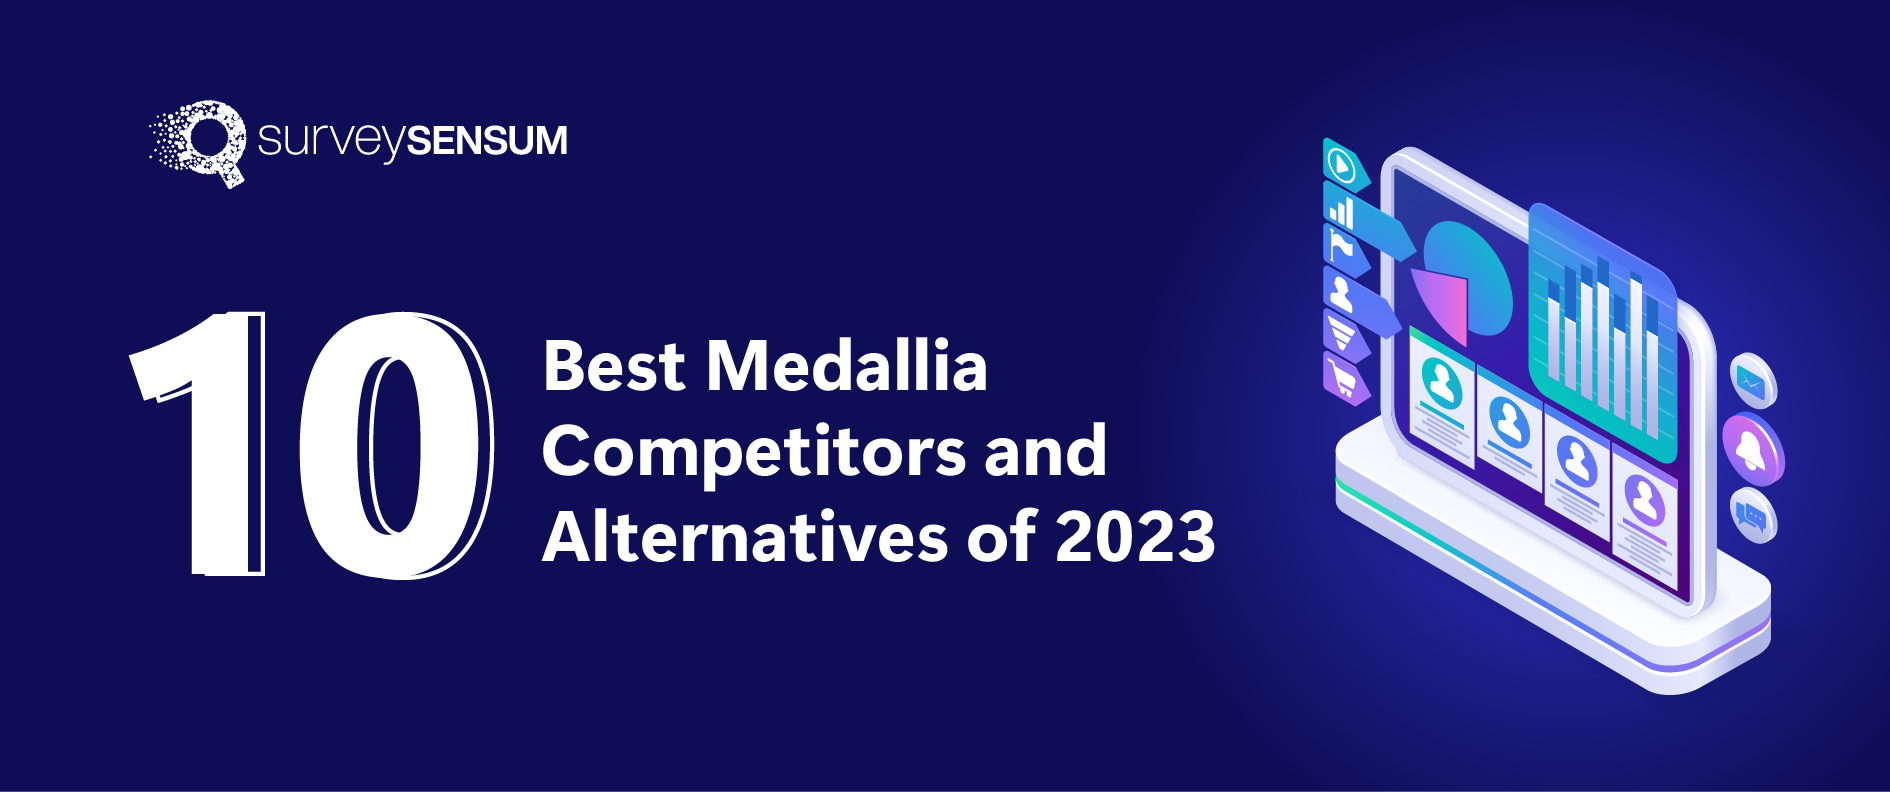 10 Best Medallia Competitors and Alternatives of 2023